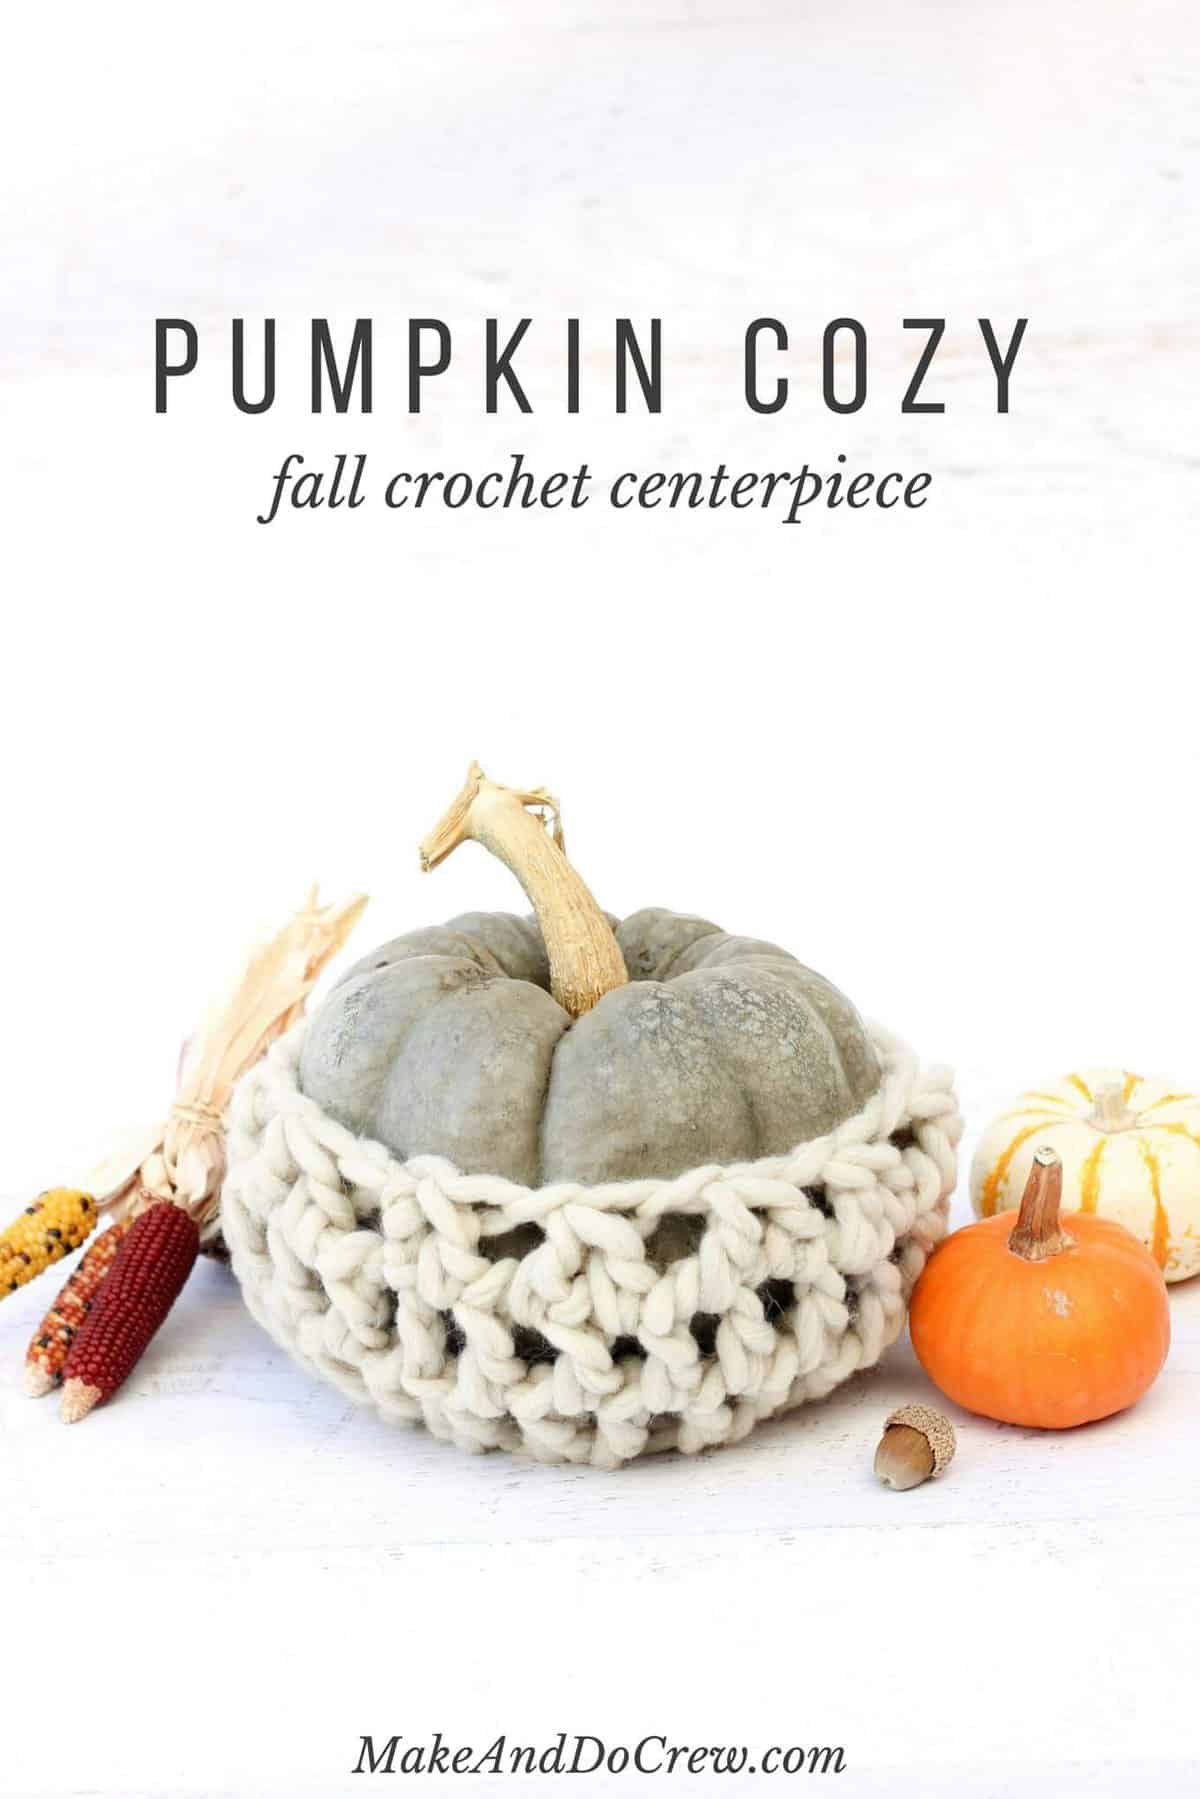 Add a chunky wool-wrapped pumpkin to your Thanksgiving tablescape with this easy fall crochet pattern! This pumpkin cozy centerpiece works up quickly in bulky yarn-L.B. Collection Natural Wool by Lion Brand. 